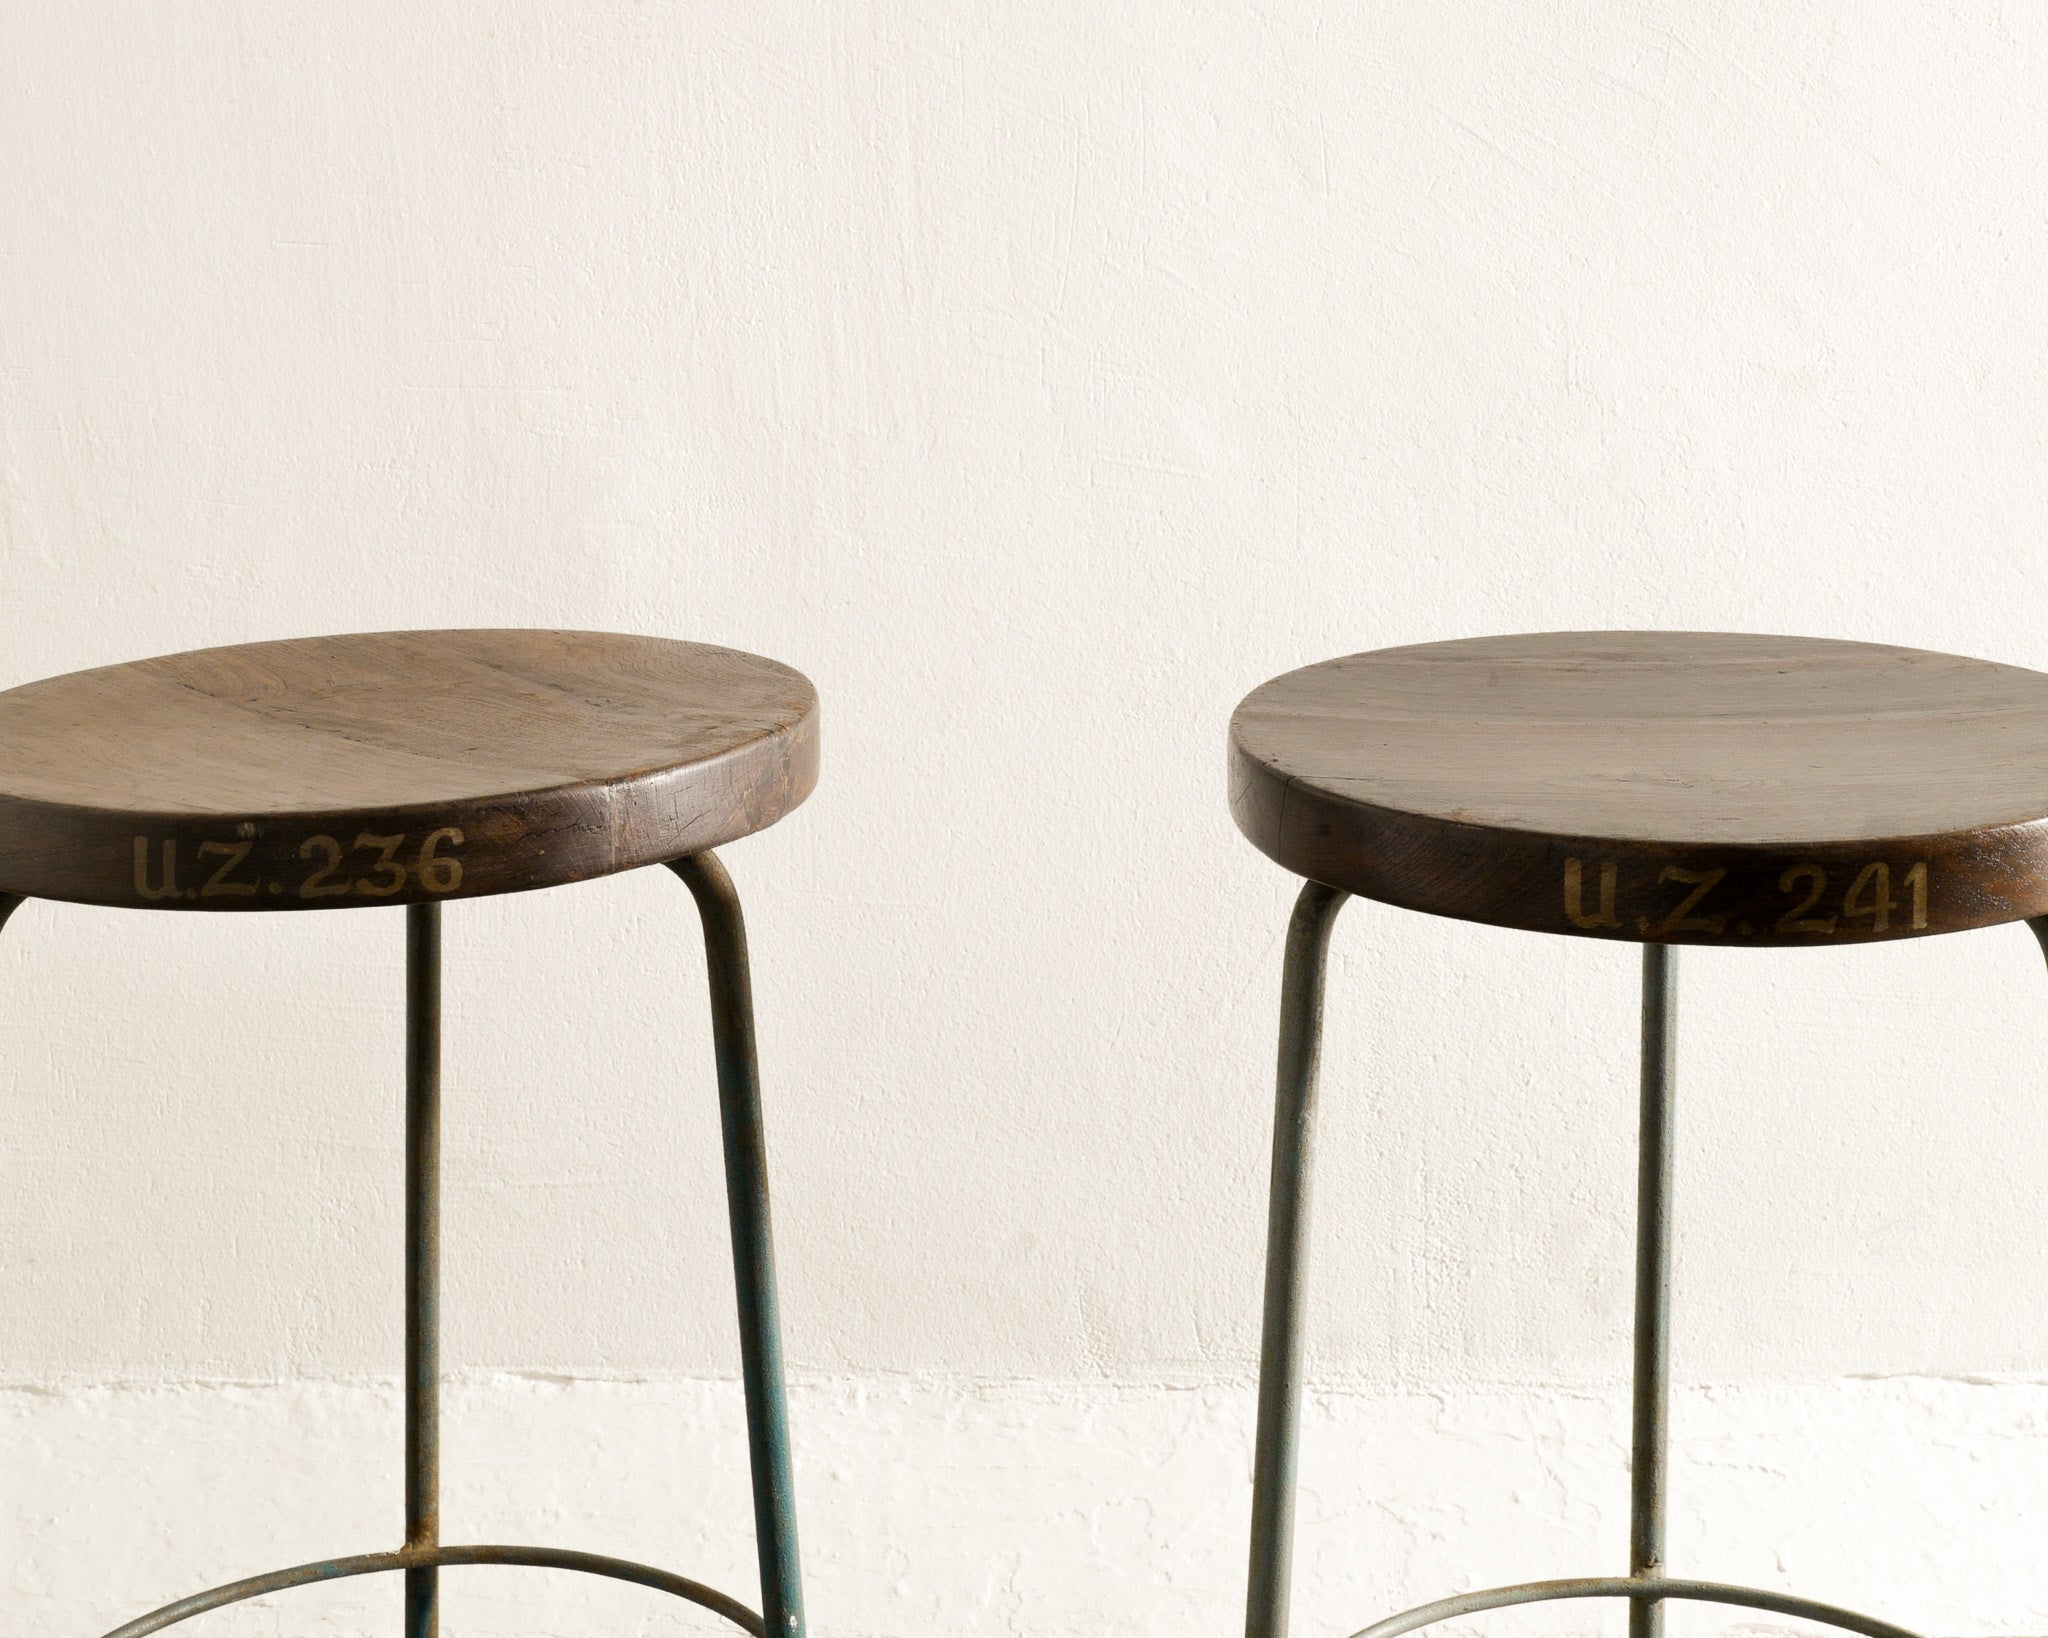 PAIR OF PIERRE JEANNERET HIGH STOOLS, 1950s